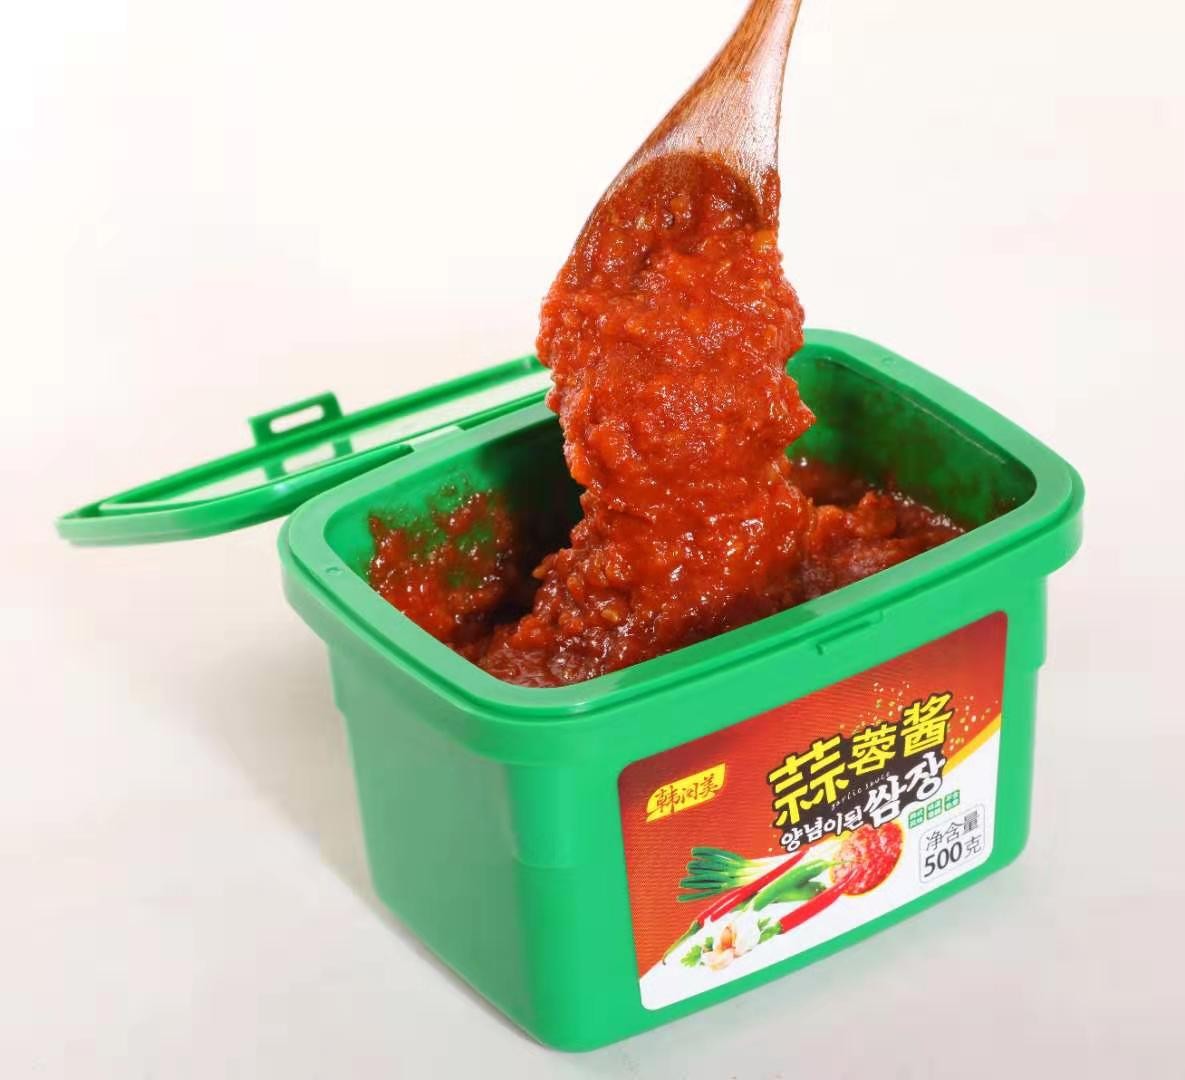 200g plastic box packaging garlic sauce product barbecue sauce